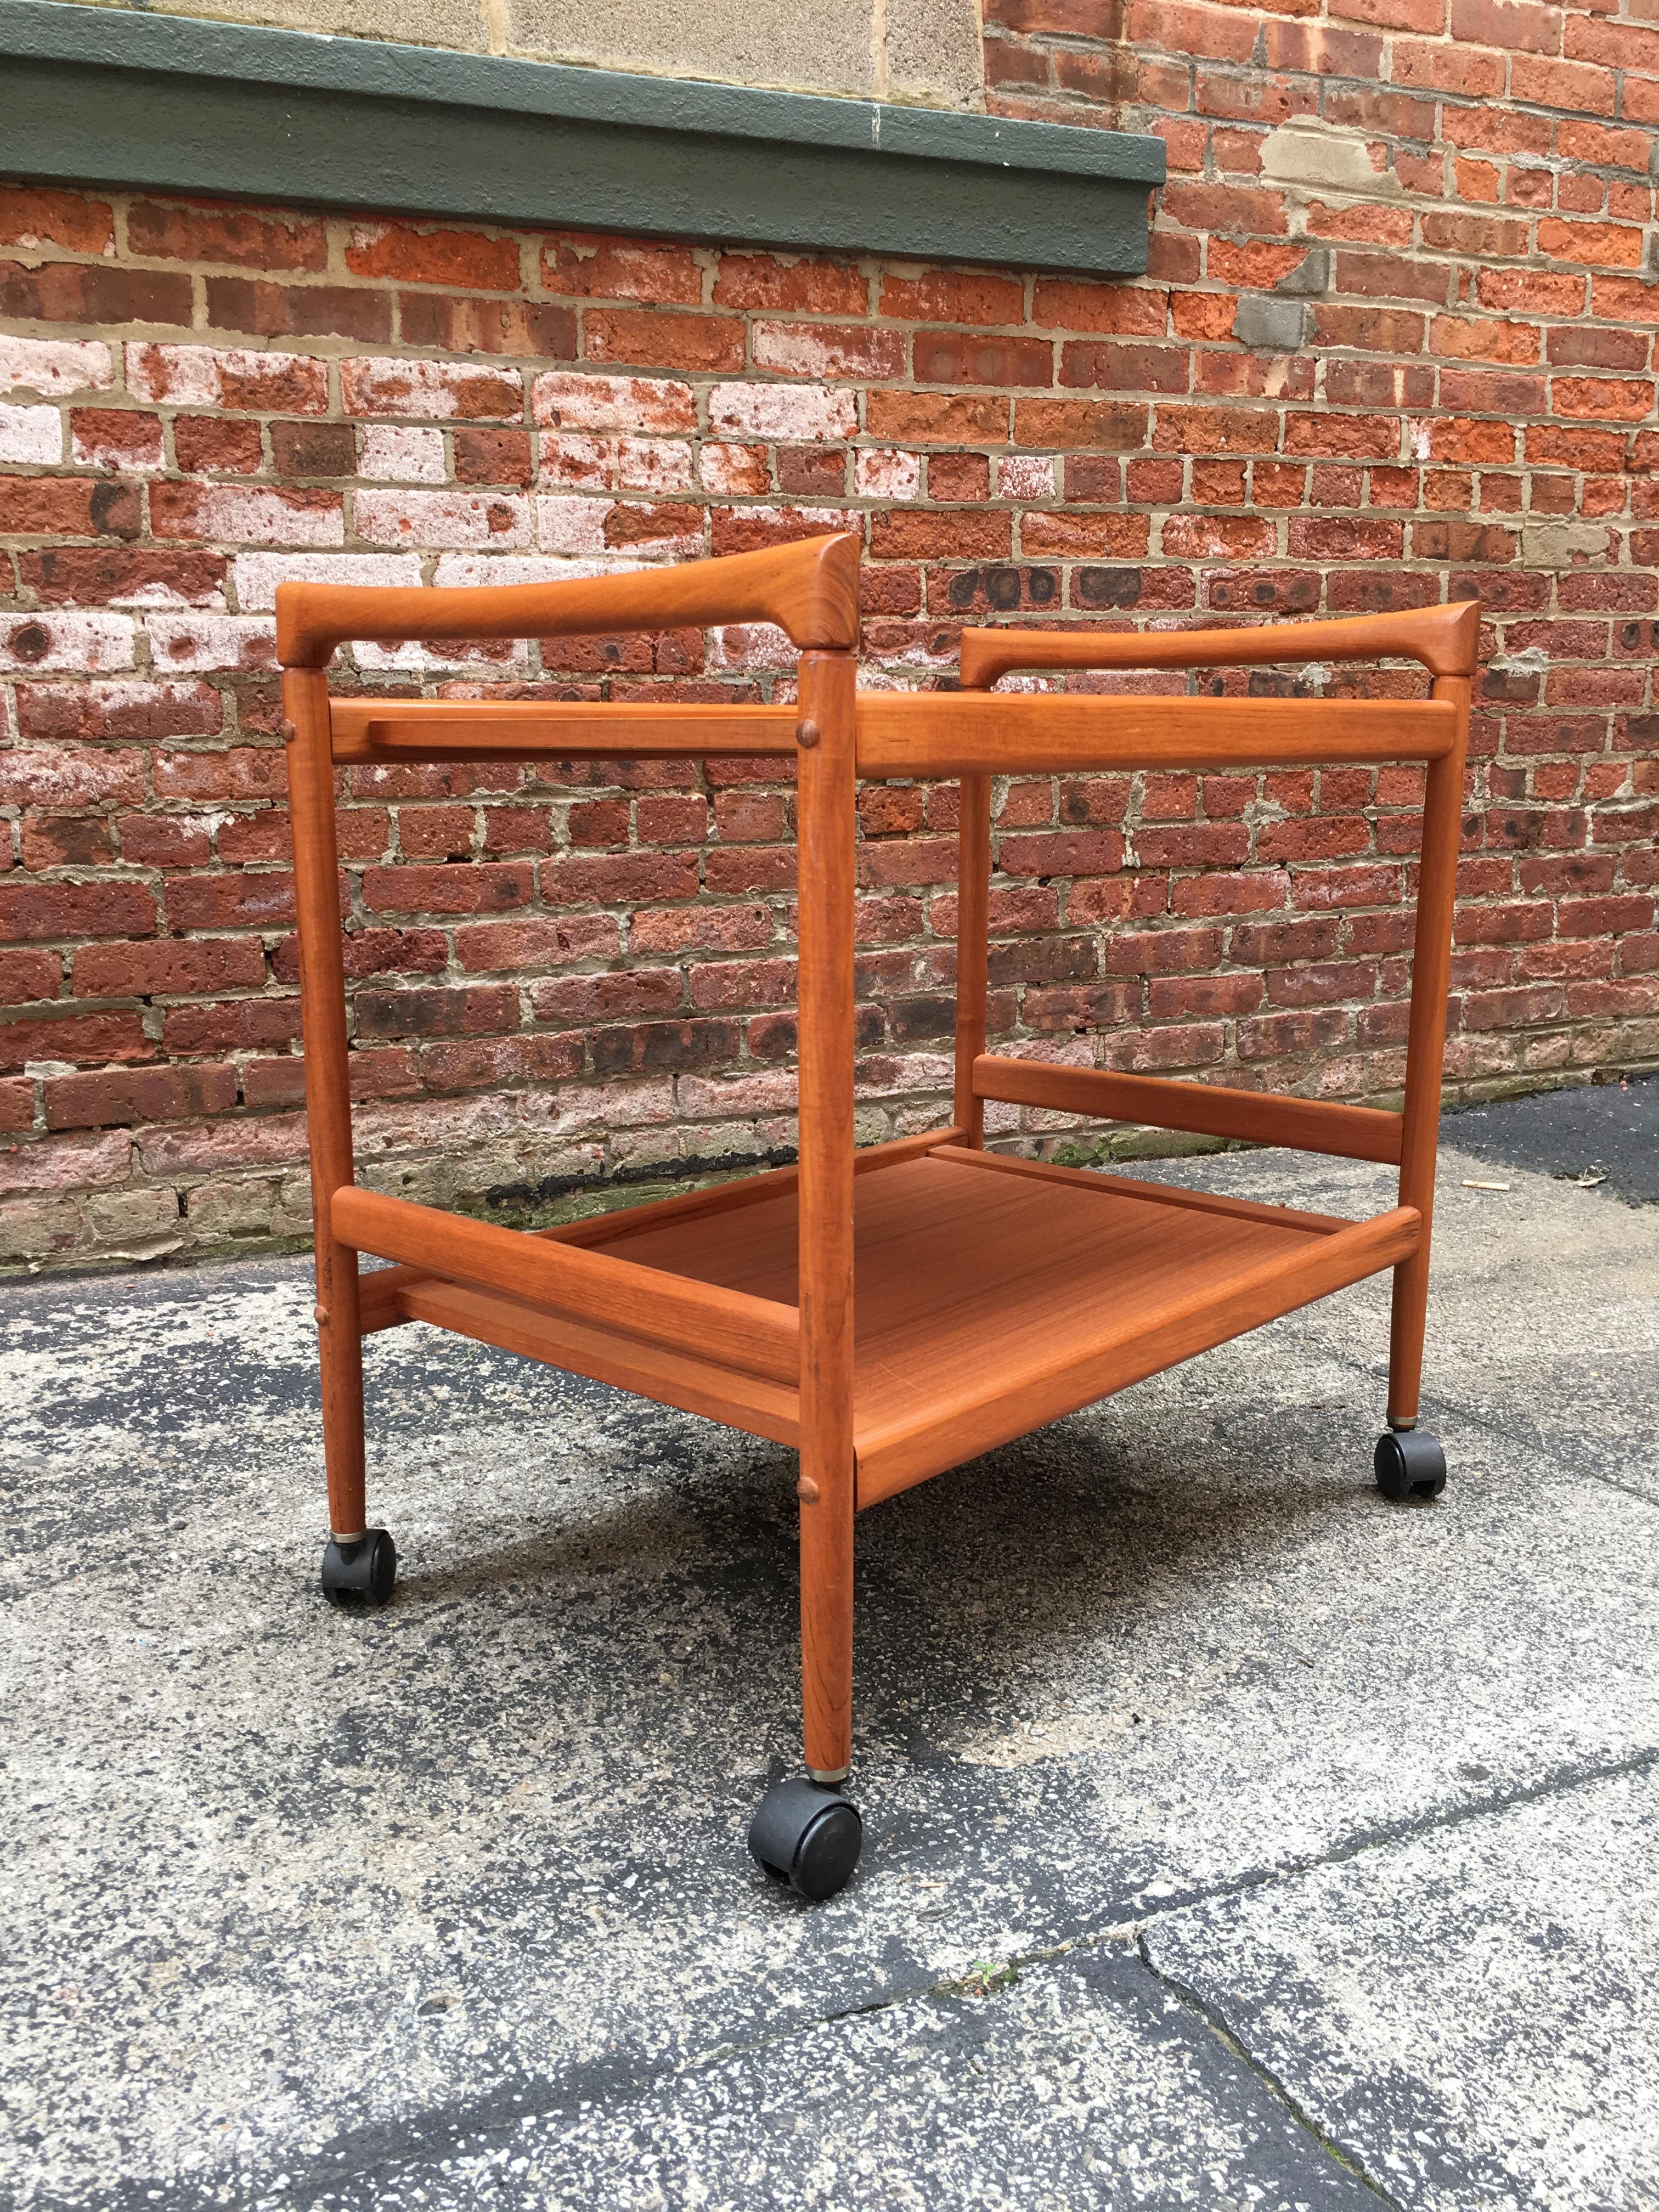 Dyrlund Danish teak rolling serving/media cart. The perfect Danish modern cart for a small flat screen TV, bric brac or rolling bar cart, circa 1970-1980. Black plastic casters. Very clean original condition. Signed on bottom.